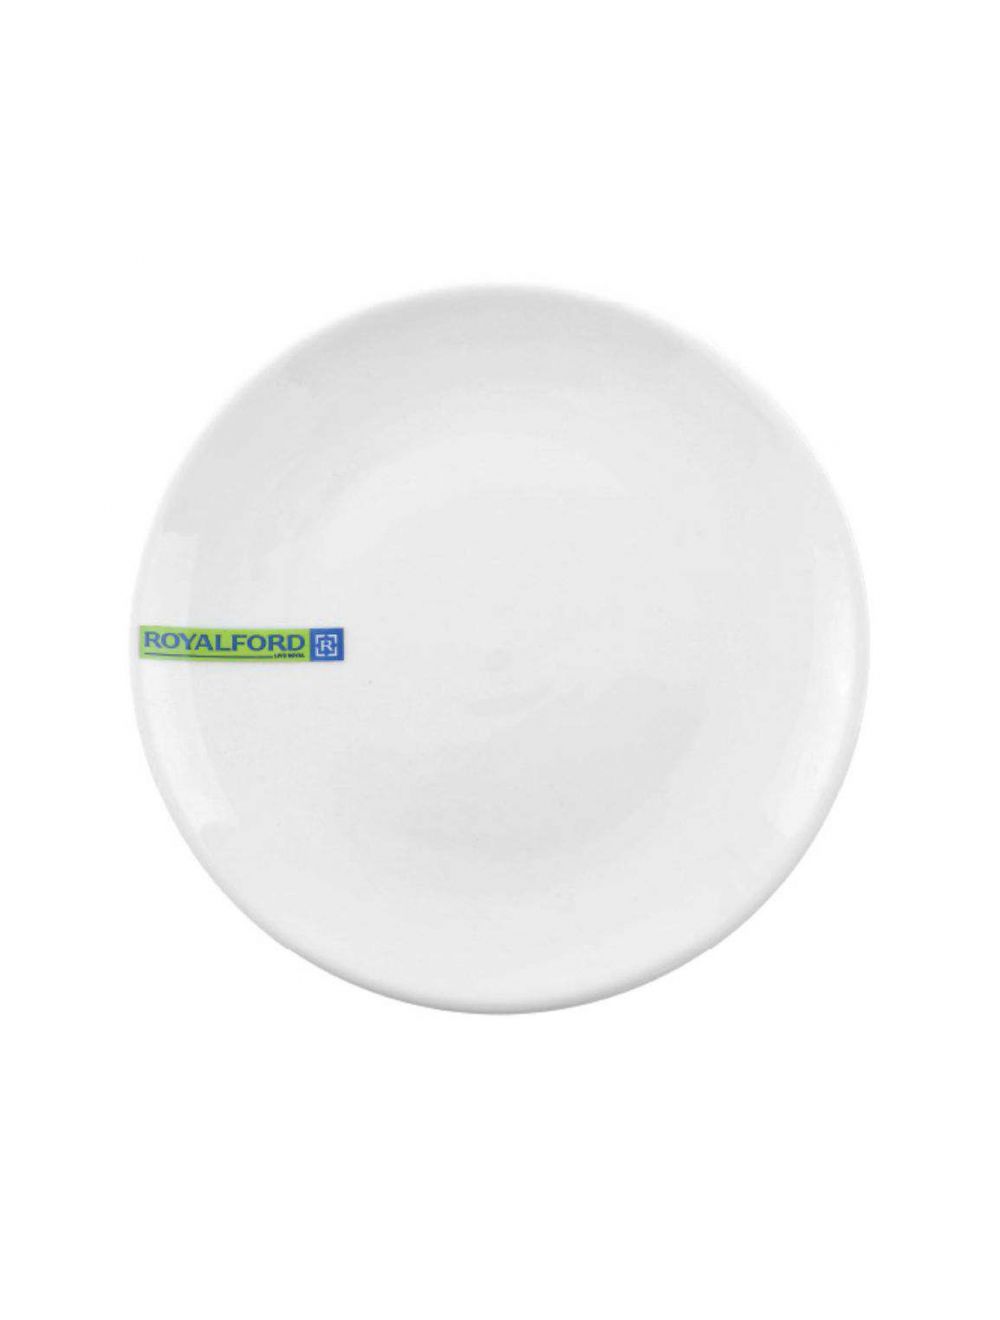 Royalford RF7998 Porcelain Magnesia Flat Plate, 9 Inch